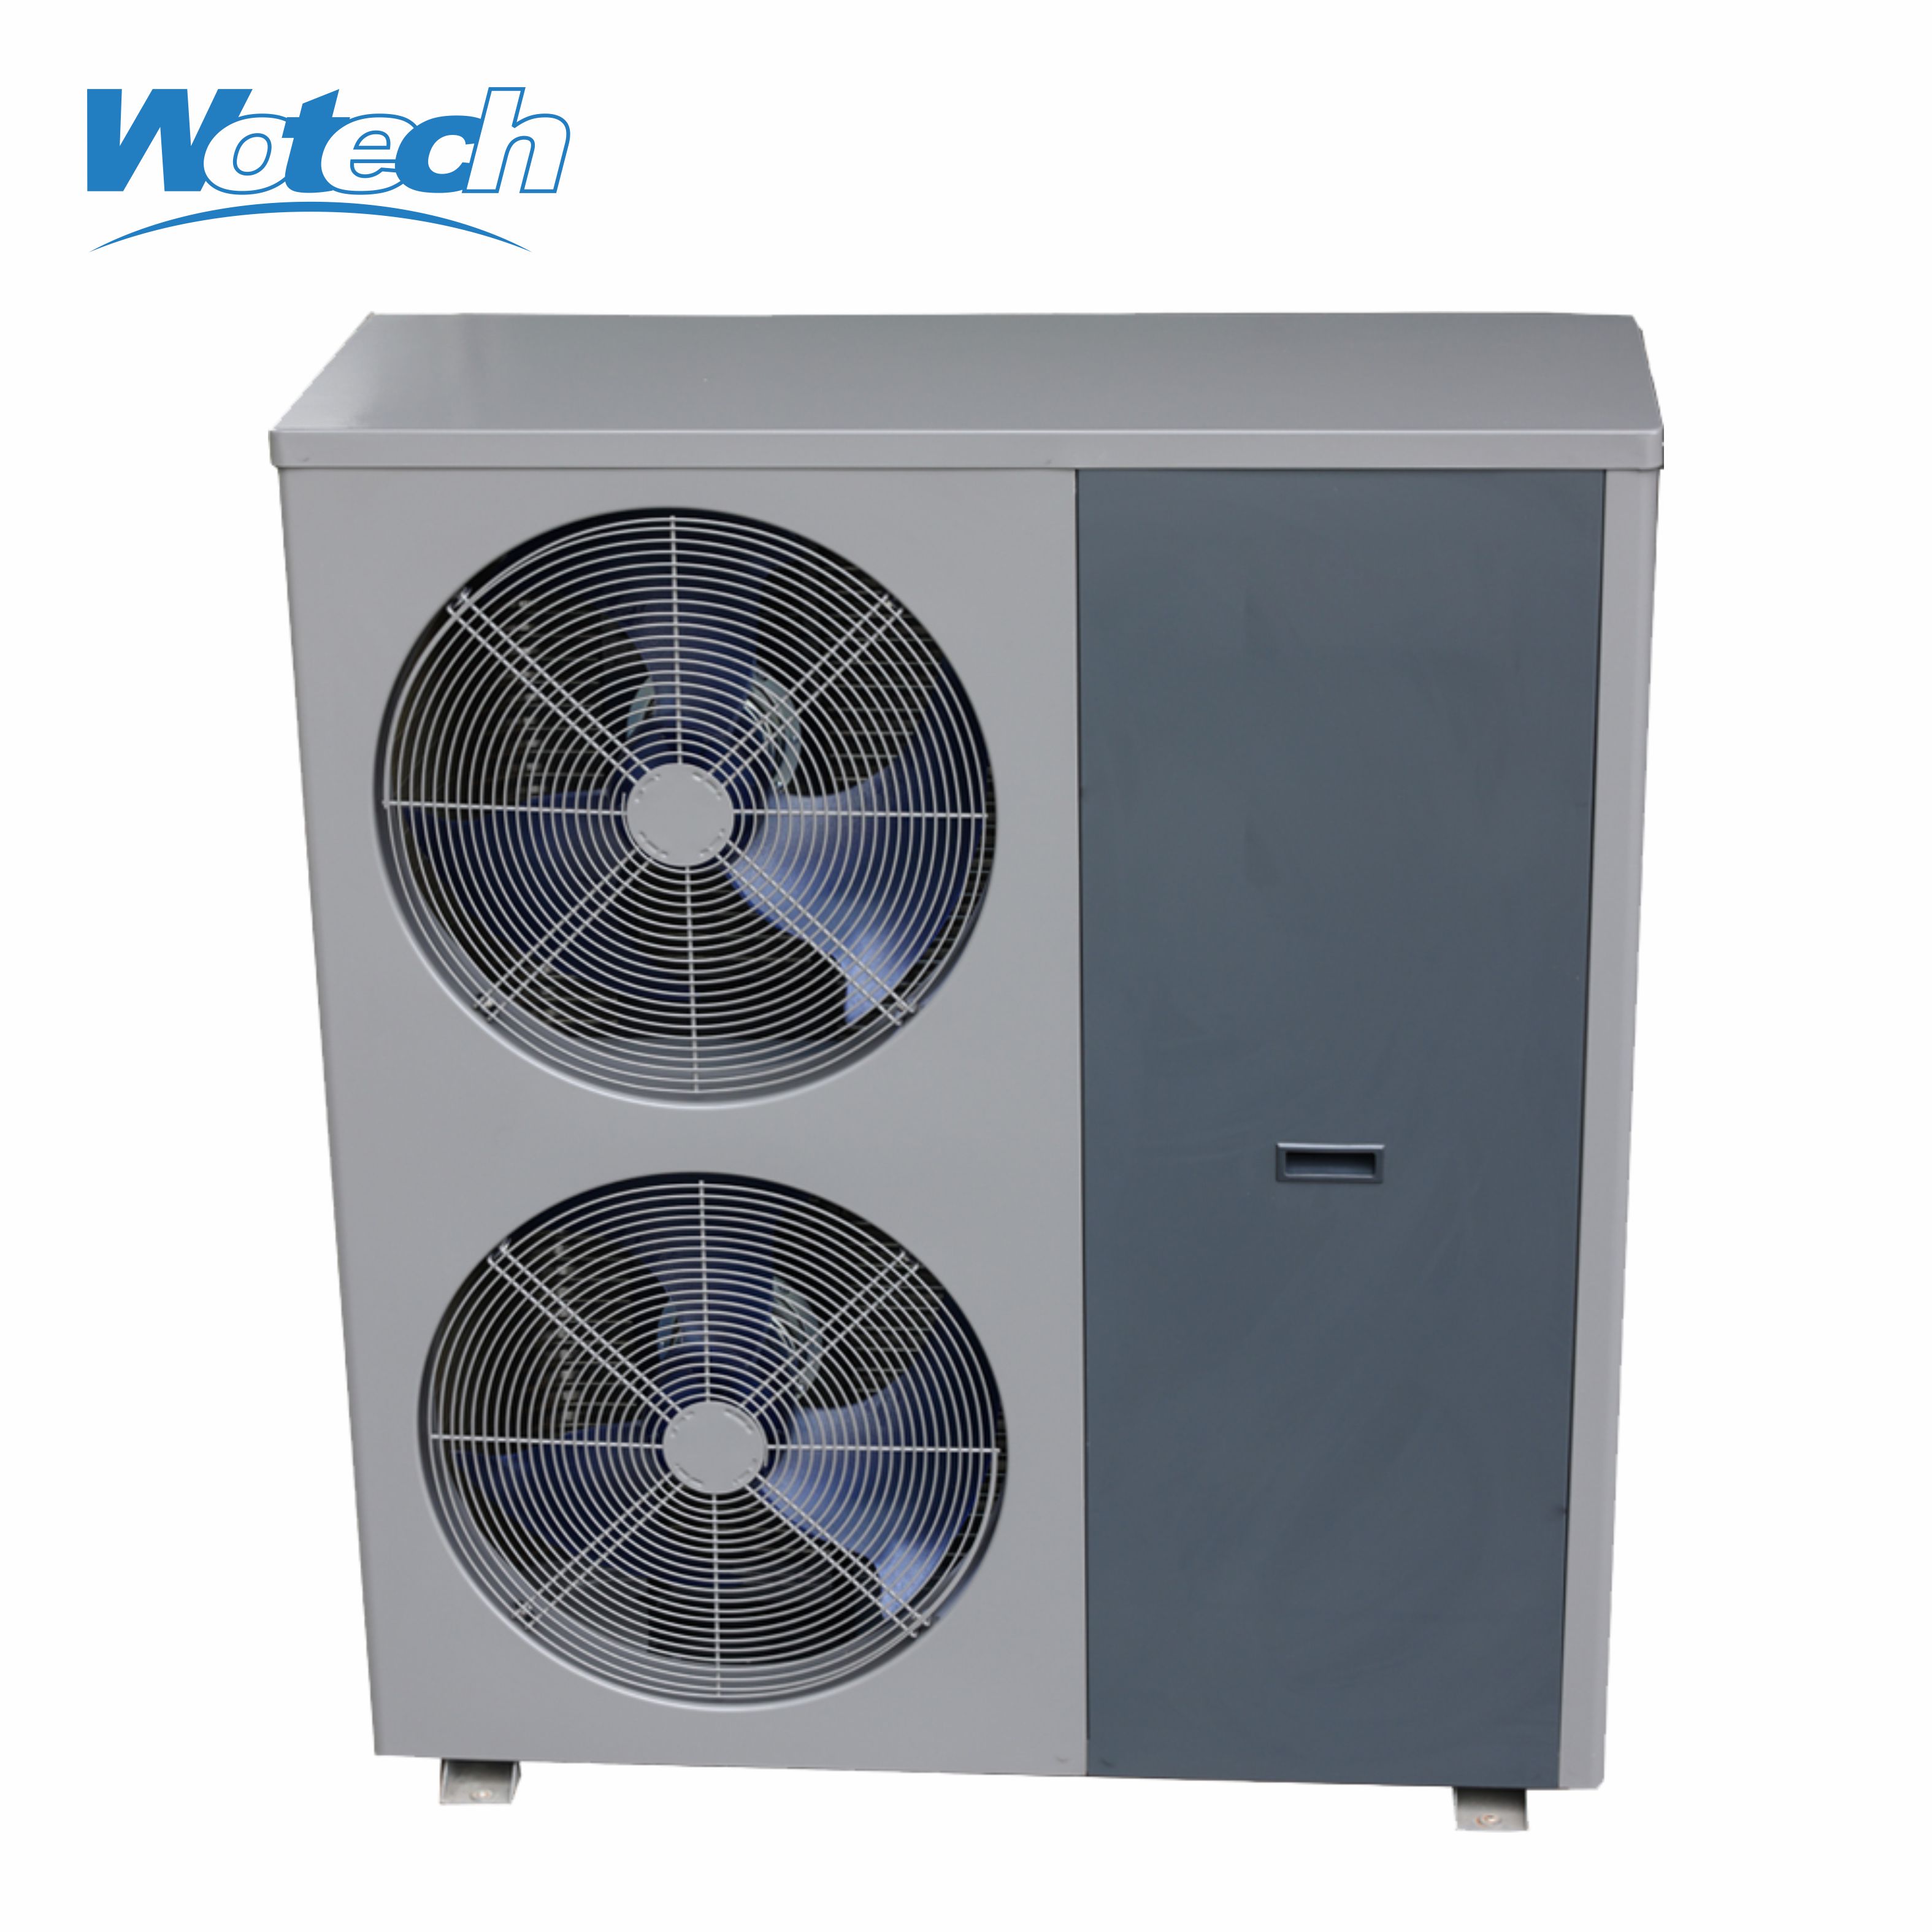 R32 Residentail Fixed Frequency Air Source Heat Pump with Cooling Function